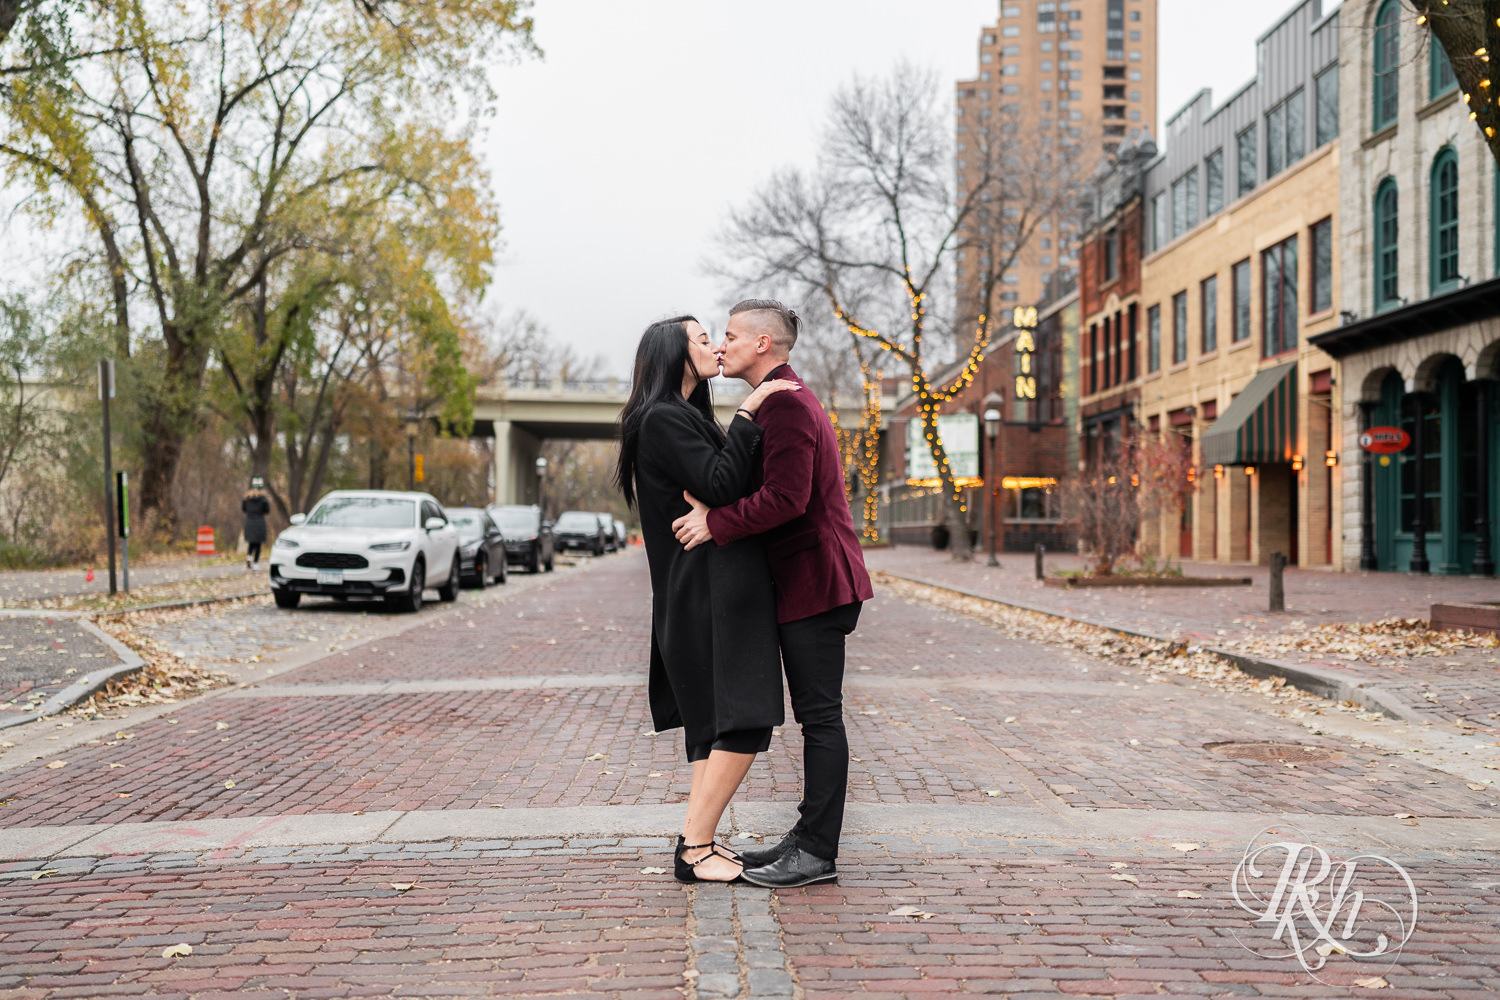 Man in black clothes and burgundy jacket and woman in black dress kiss in the street in Minneapolis, Minnesota.